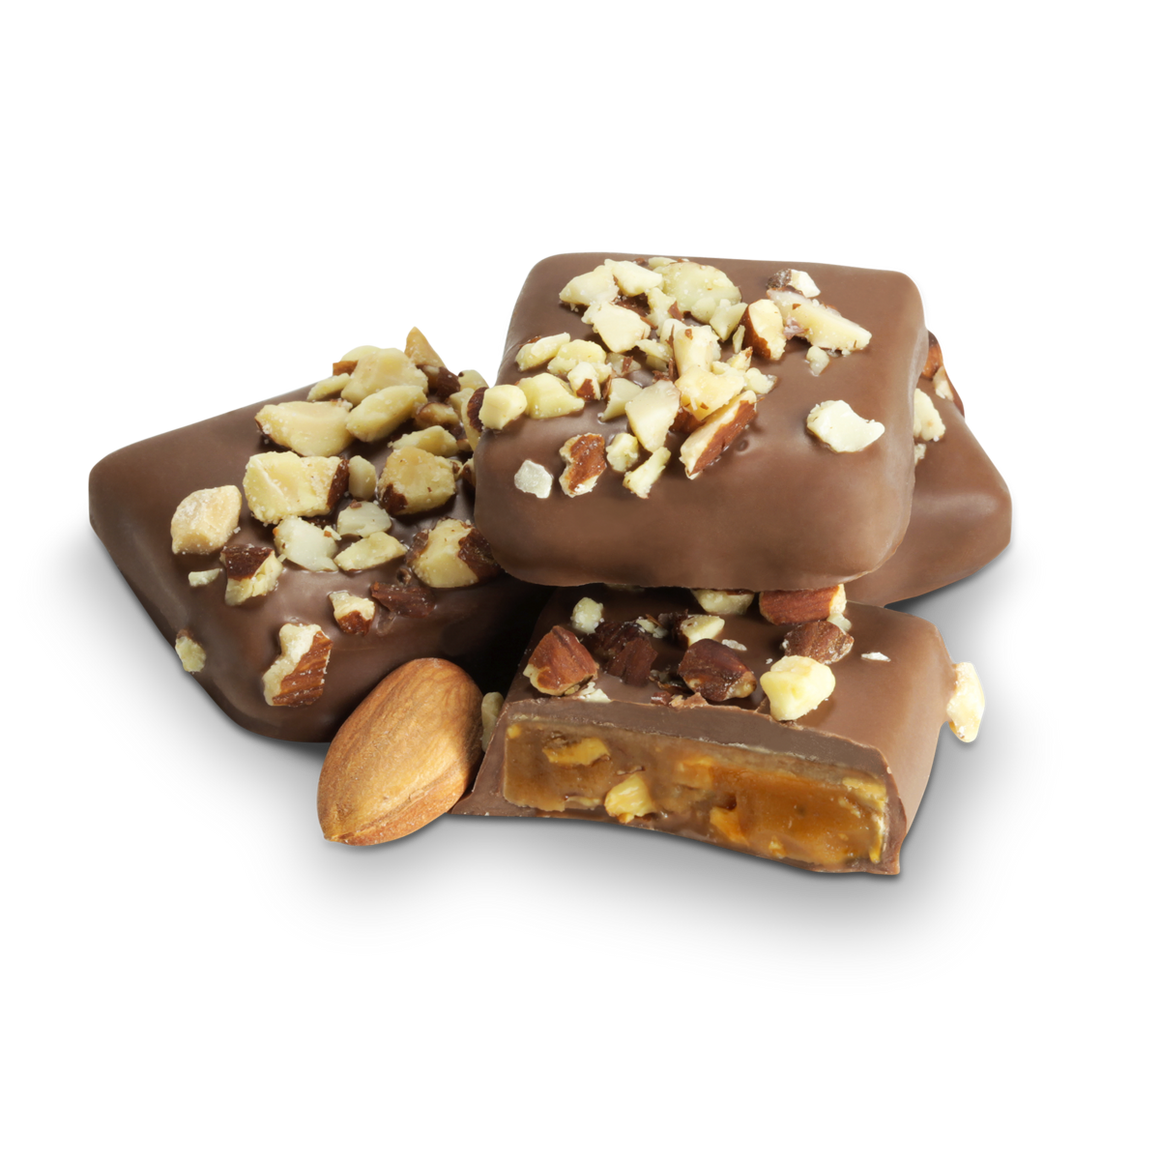 All City Candy Milk Chocolate Toffee with Almonds - 1 LB Box Chocolate Albanese Confectionery For fresh candy and great service, visit www.allcitycandy.com